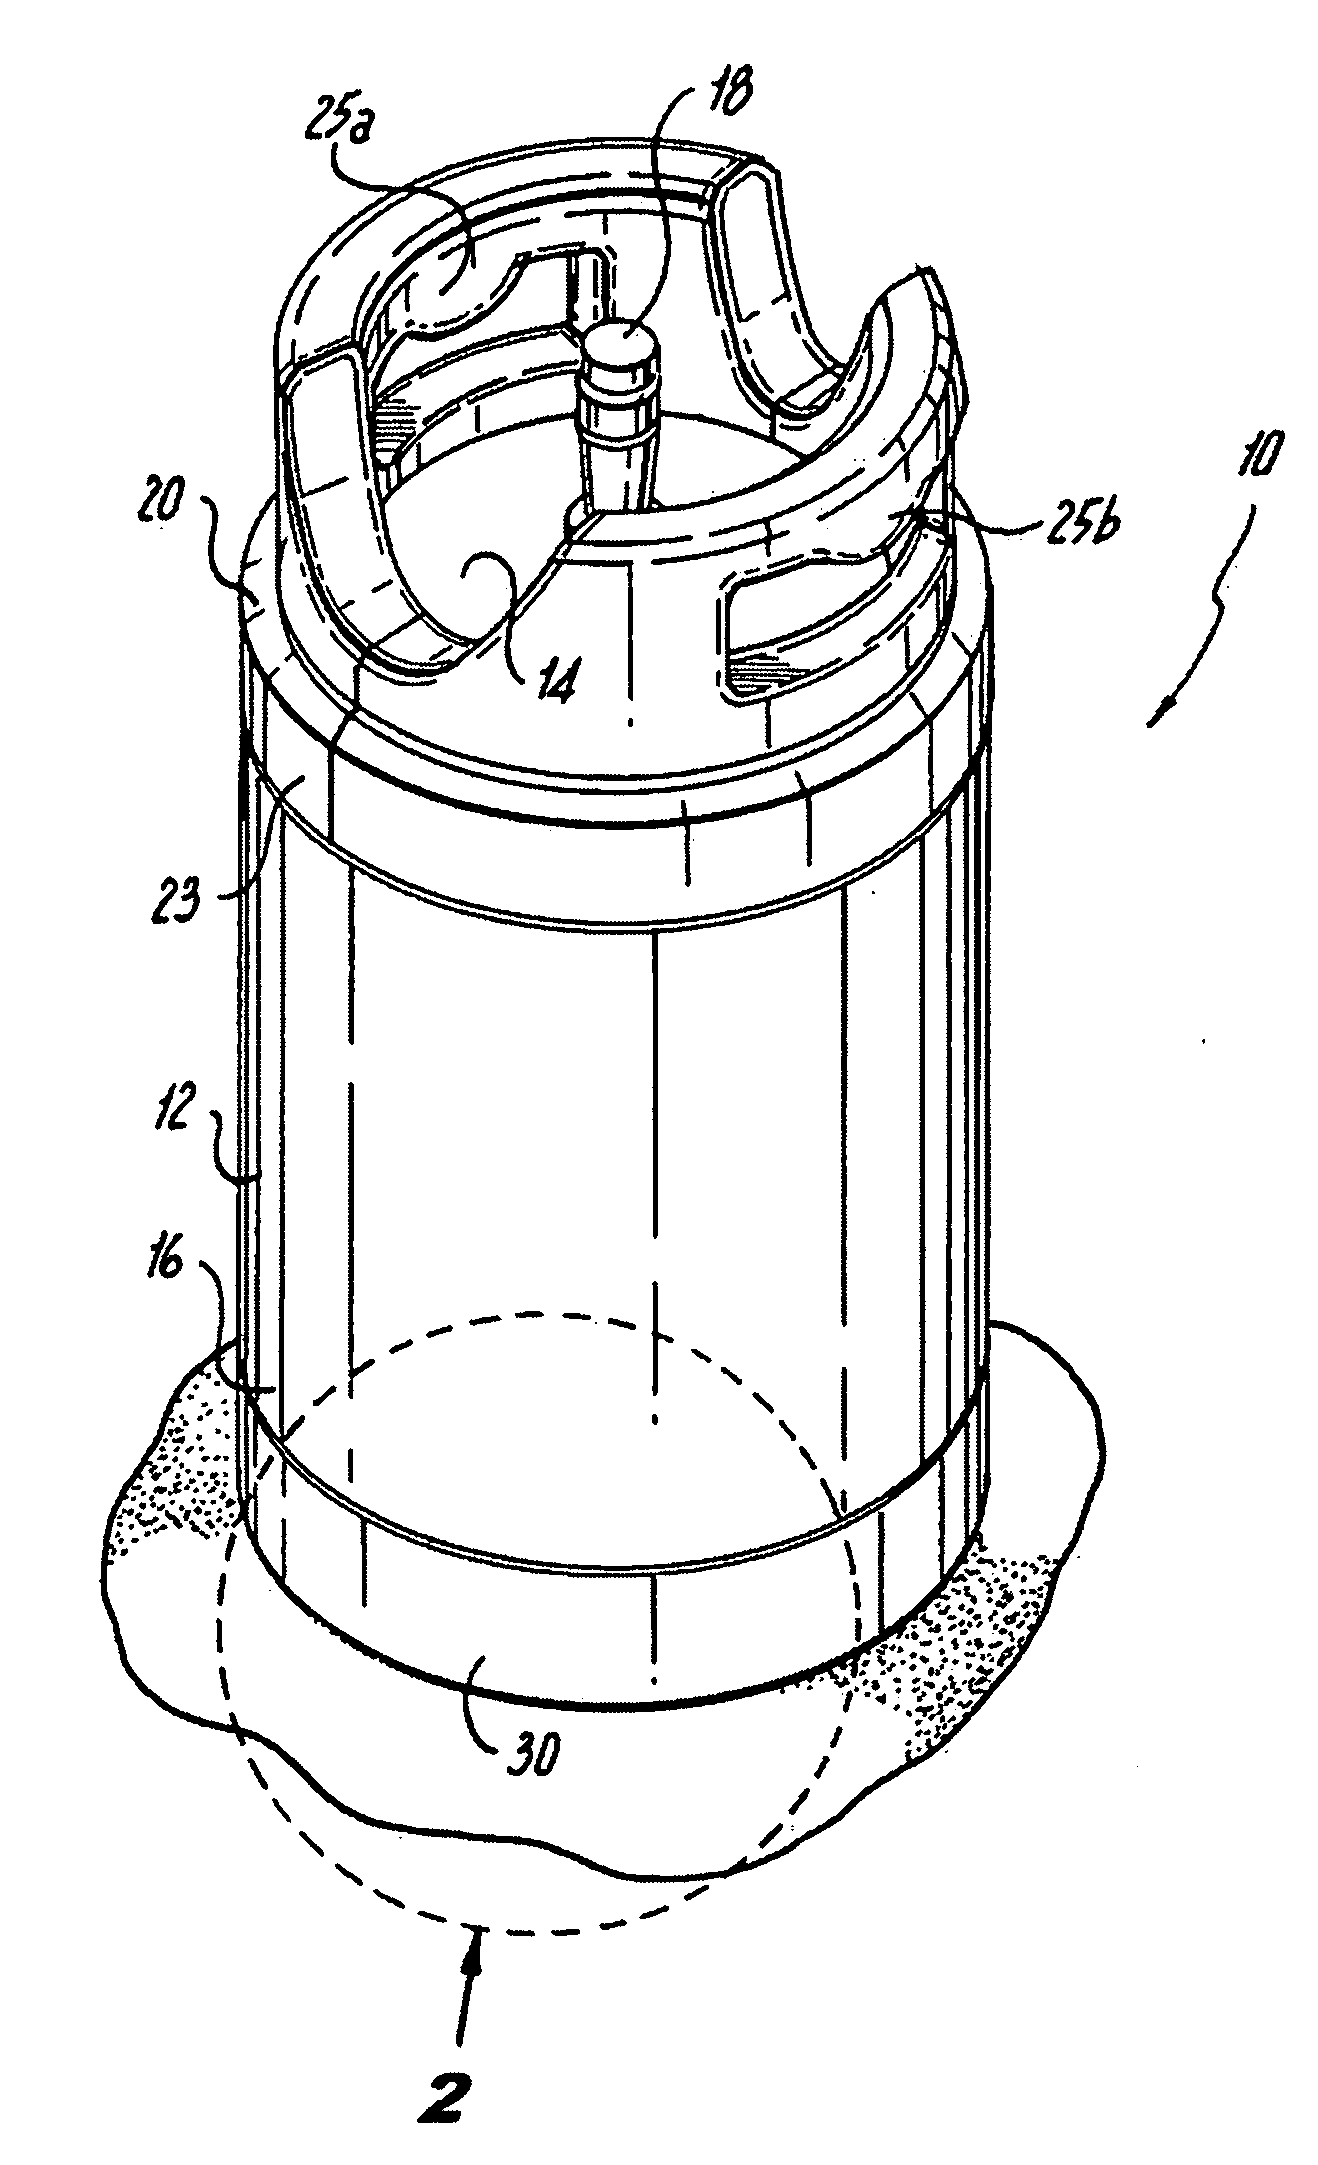 Compressed gas cylinder having conductive polymeric foot ring